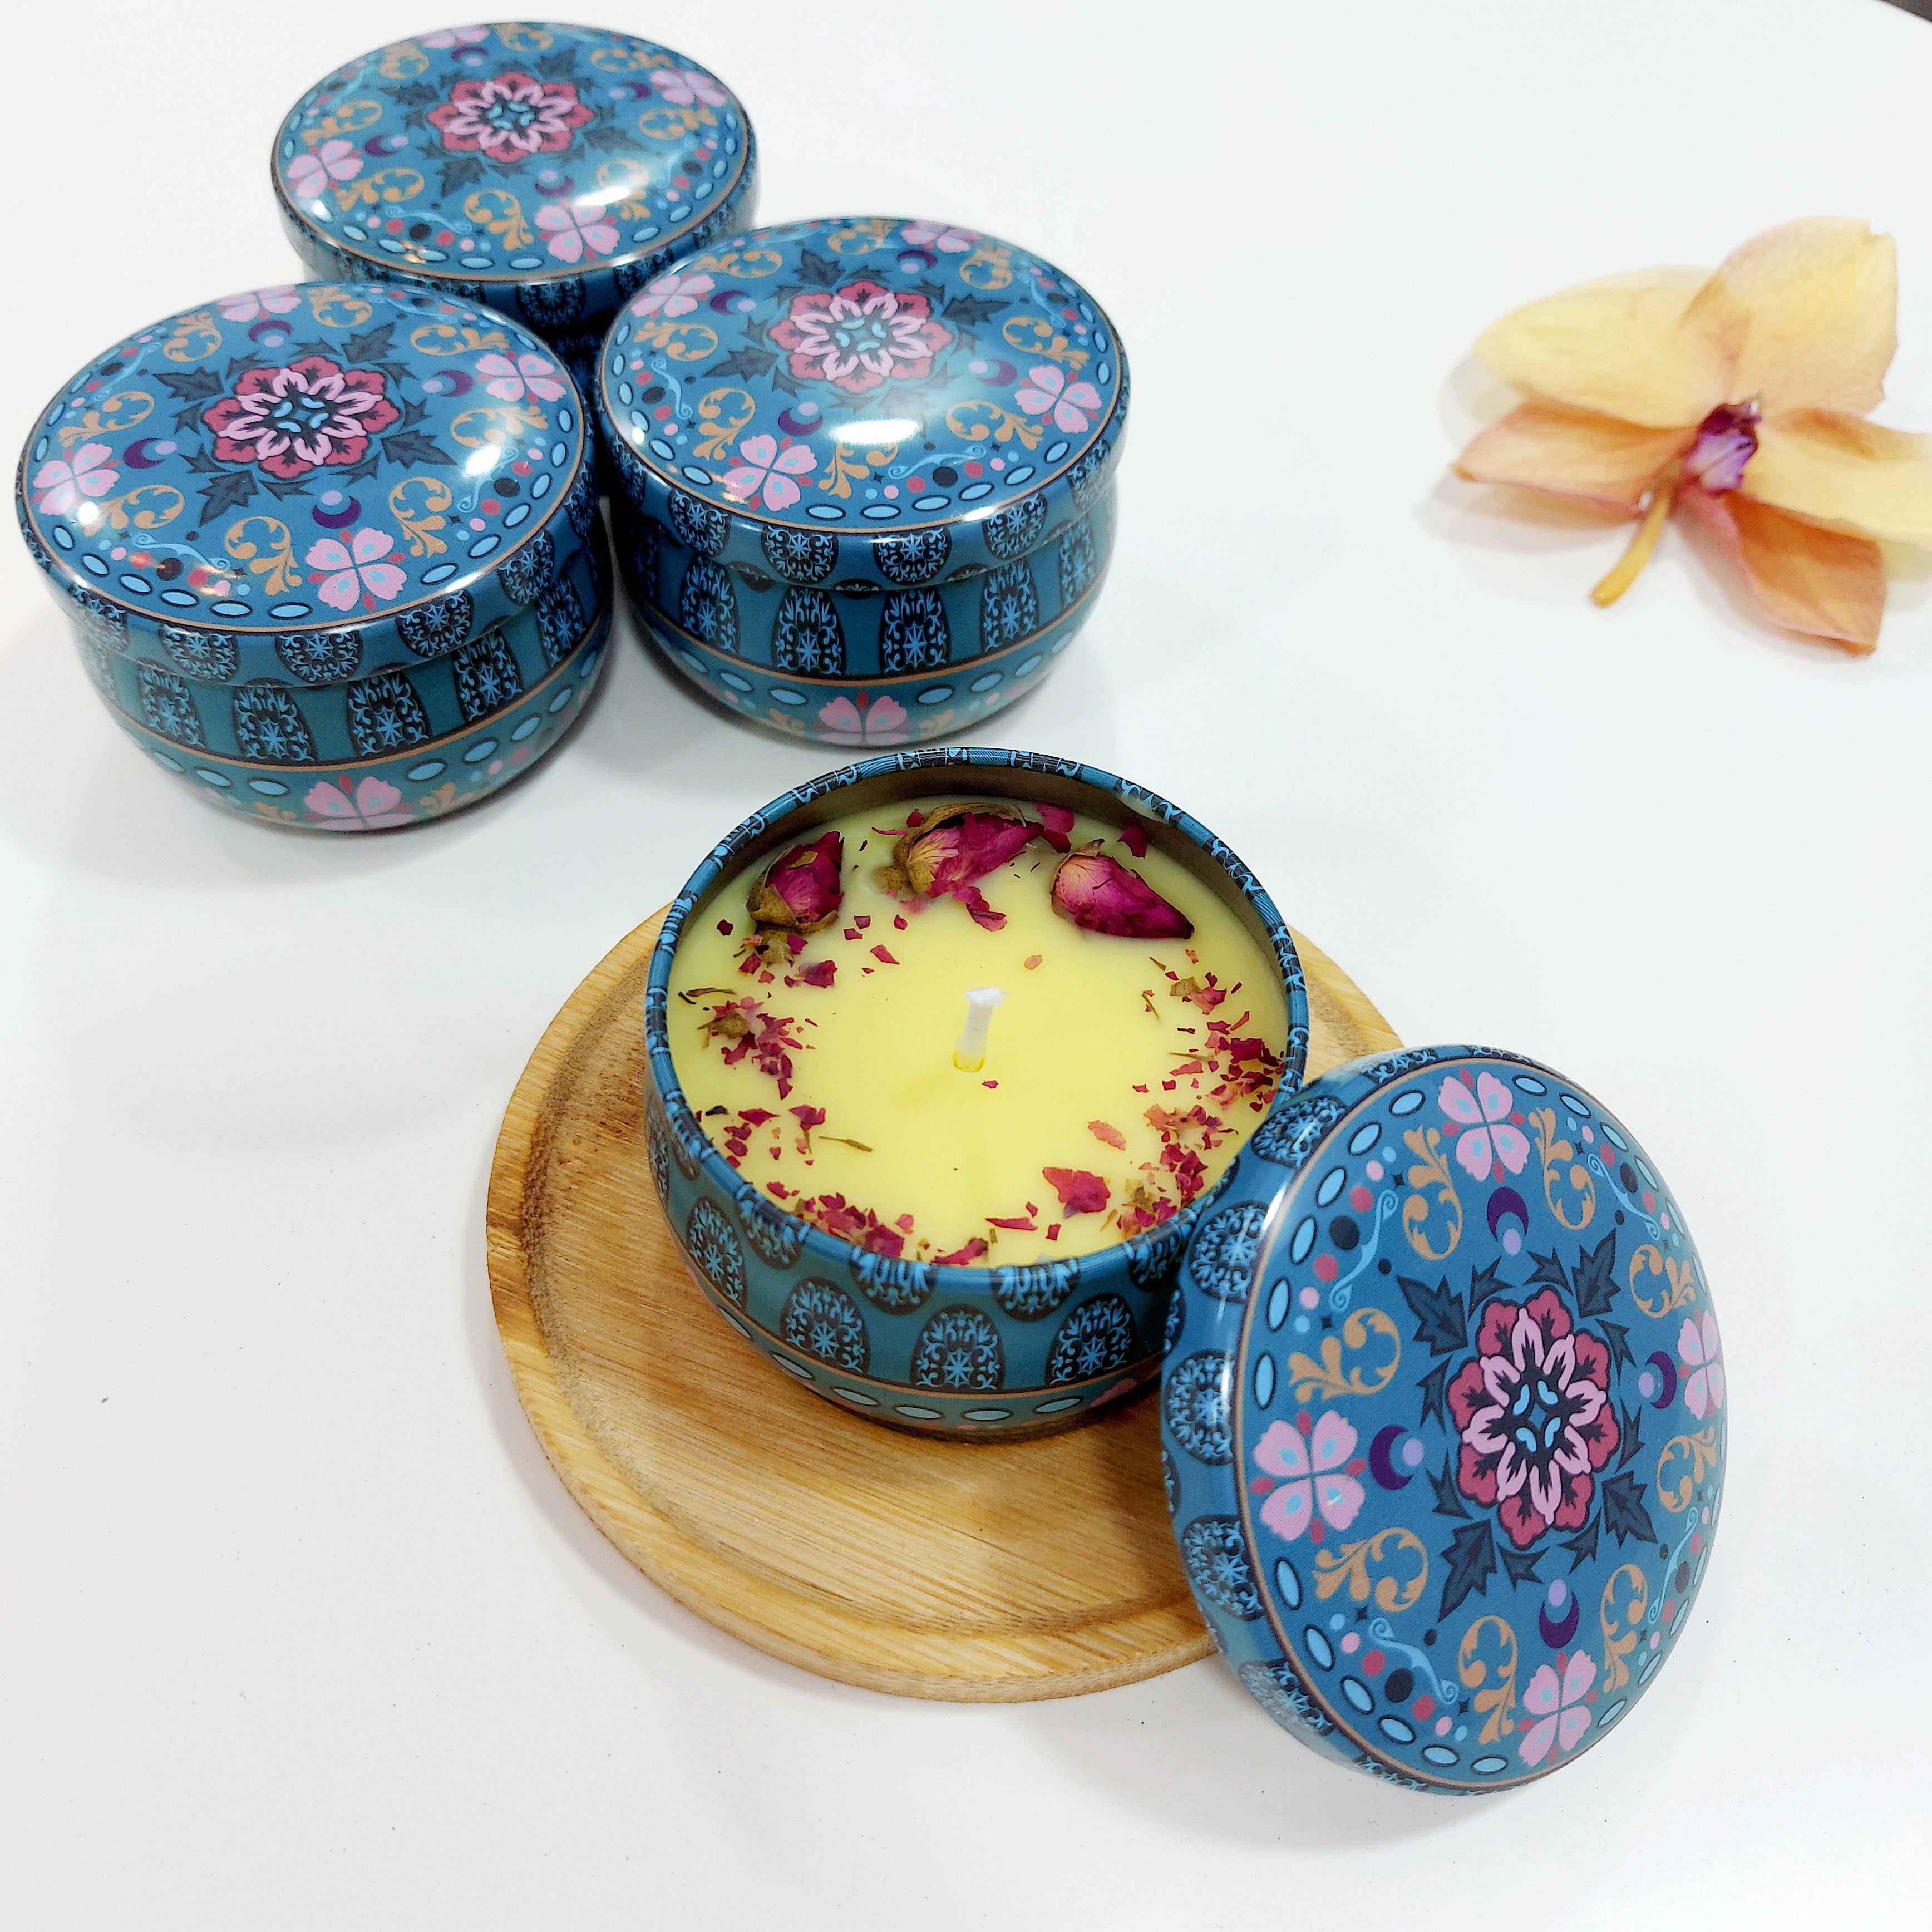 Fragrant Breeze scented natural soy wax and bee wax candles. Available in: rose, lavender, and coconut and vanilla. Monarchess Natural Luxuries skin care products. Monarchess, Amman, Irbid, Jordan